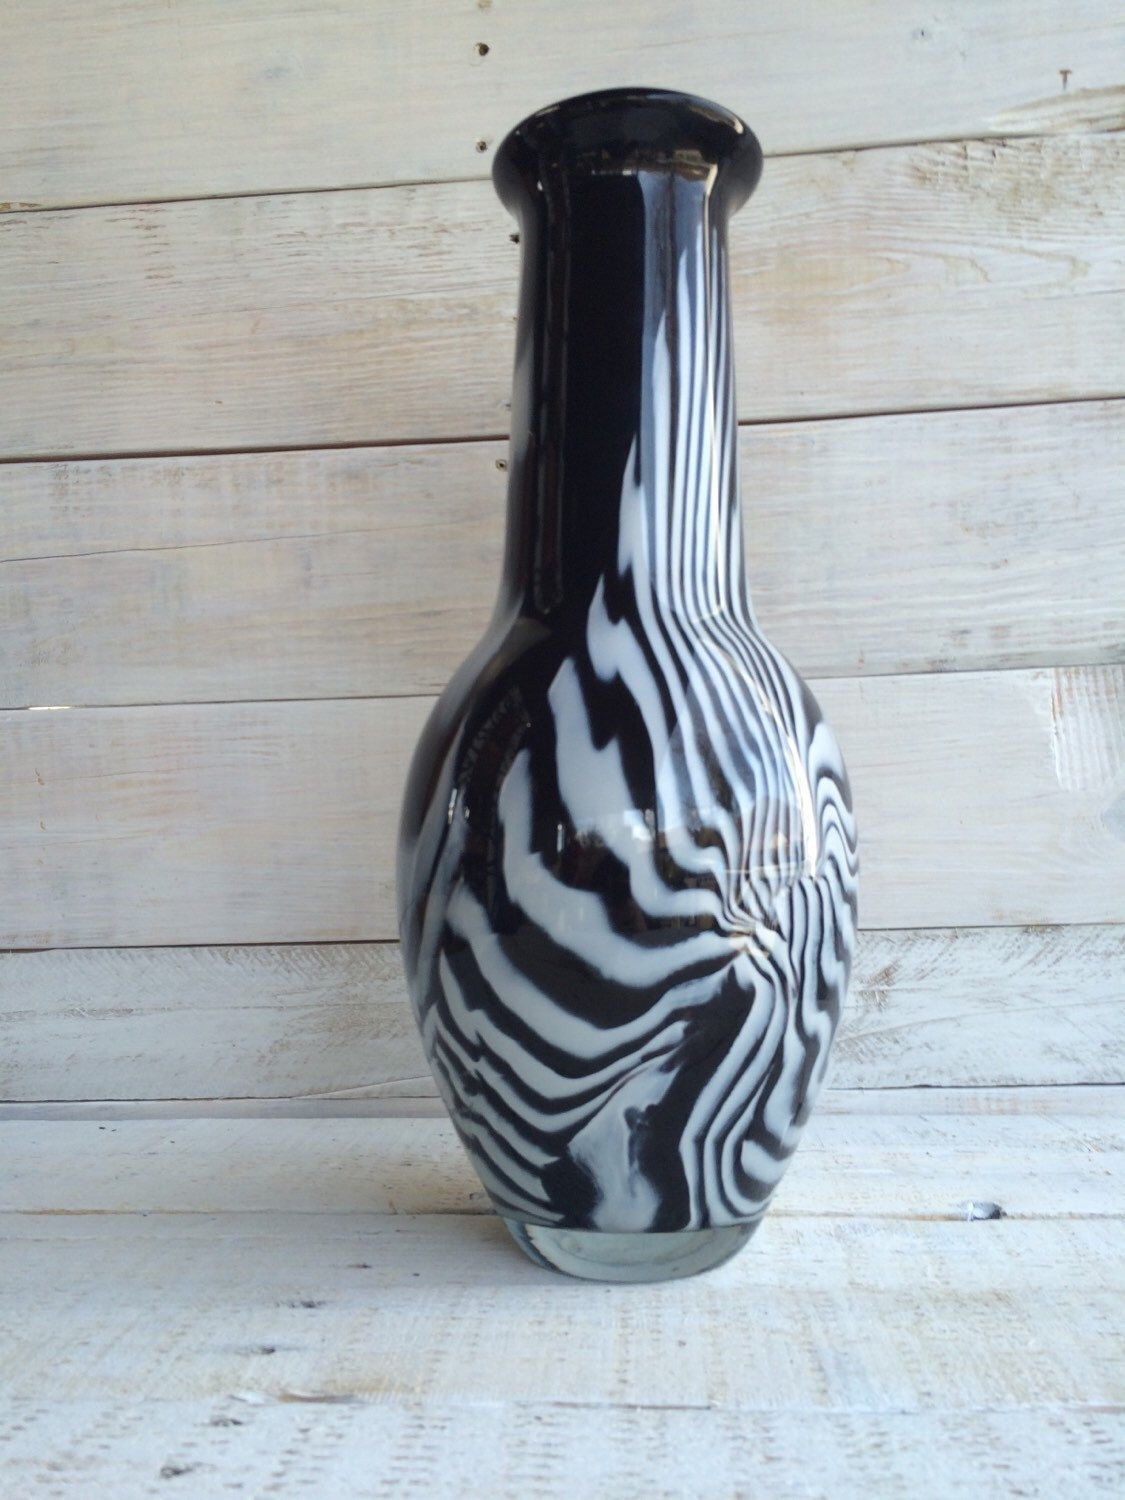 12 Great 6 Inch Vase Centerpieces 2024 free download 6 inch vase centerpieces of mihai topescu 17 inch signed vase art glass vase long neck with mihai topescu 17 inch signed vase art glass vase long neck amphora